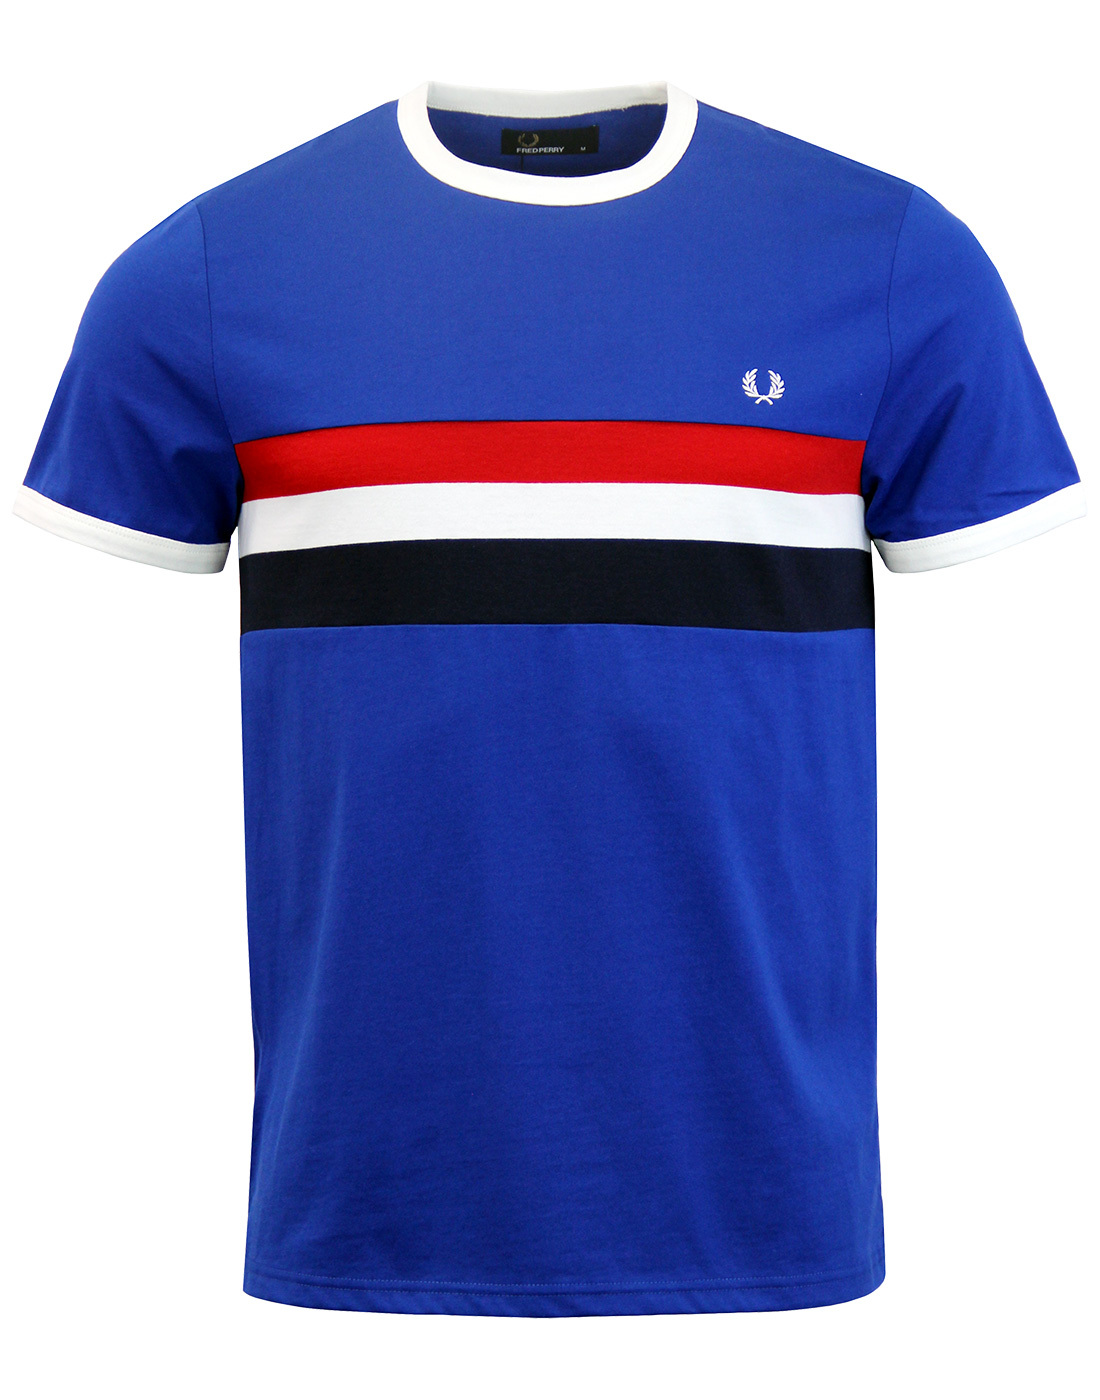 FRED PERRY Retro Mod Striped Panel Ringer Tee in Regal Blue